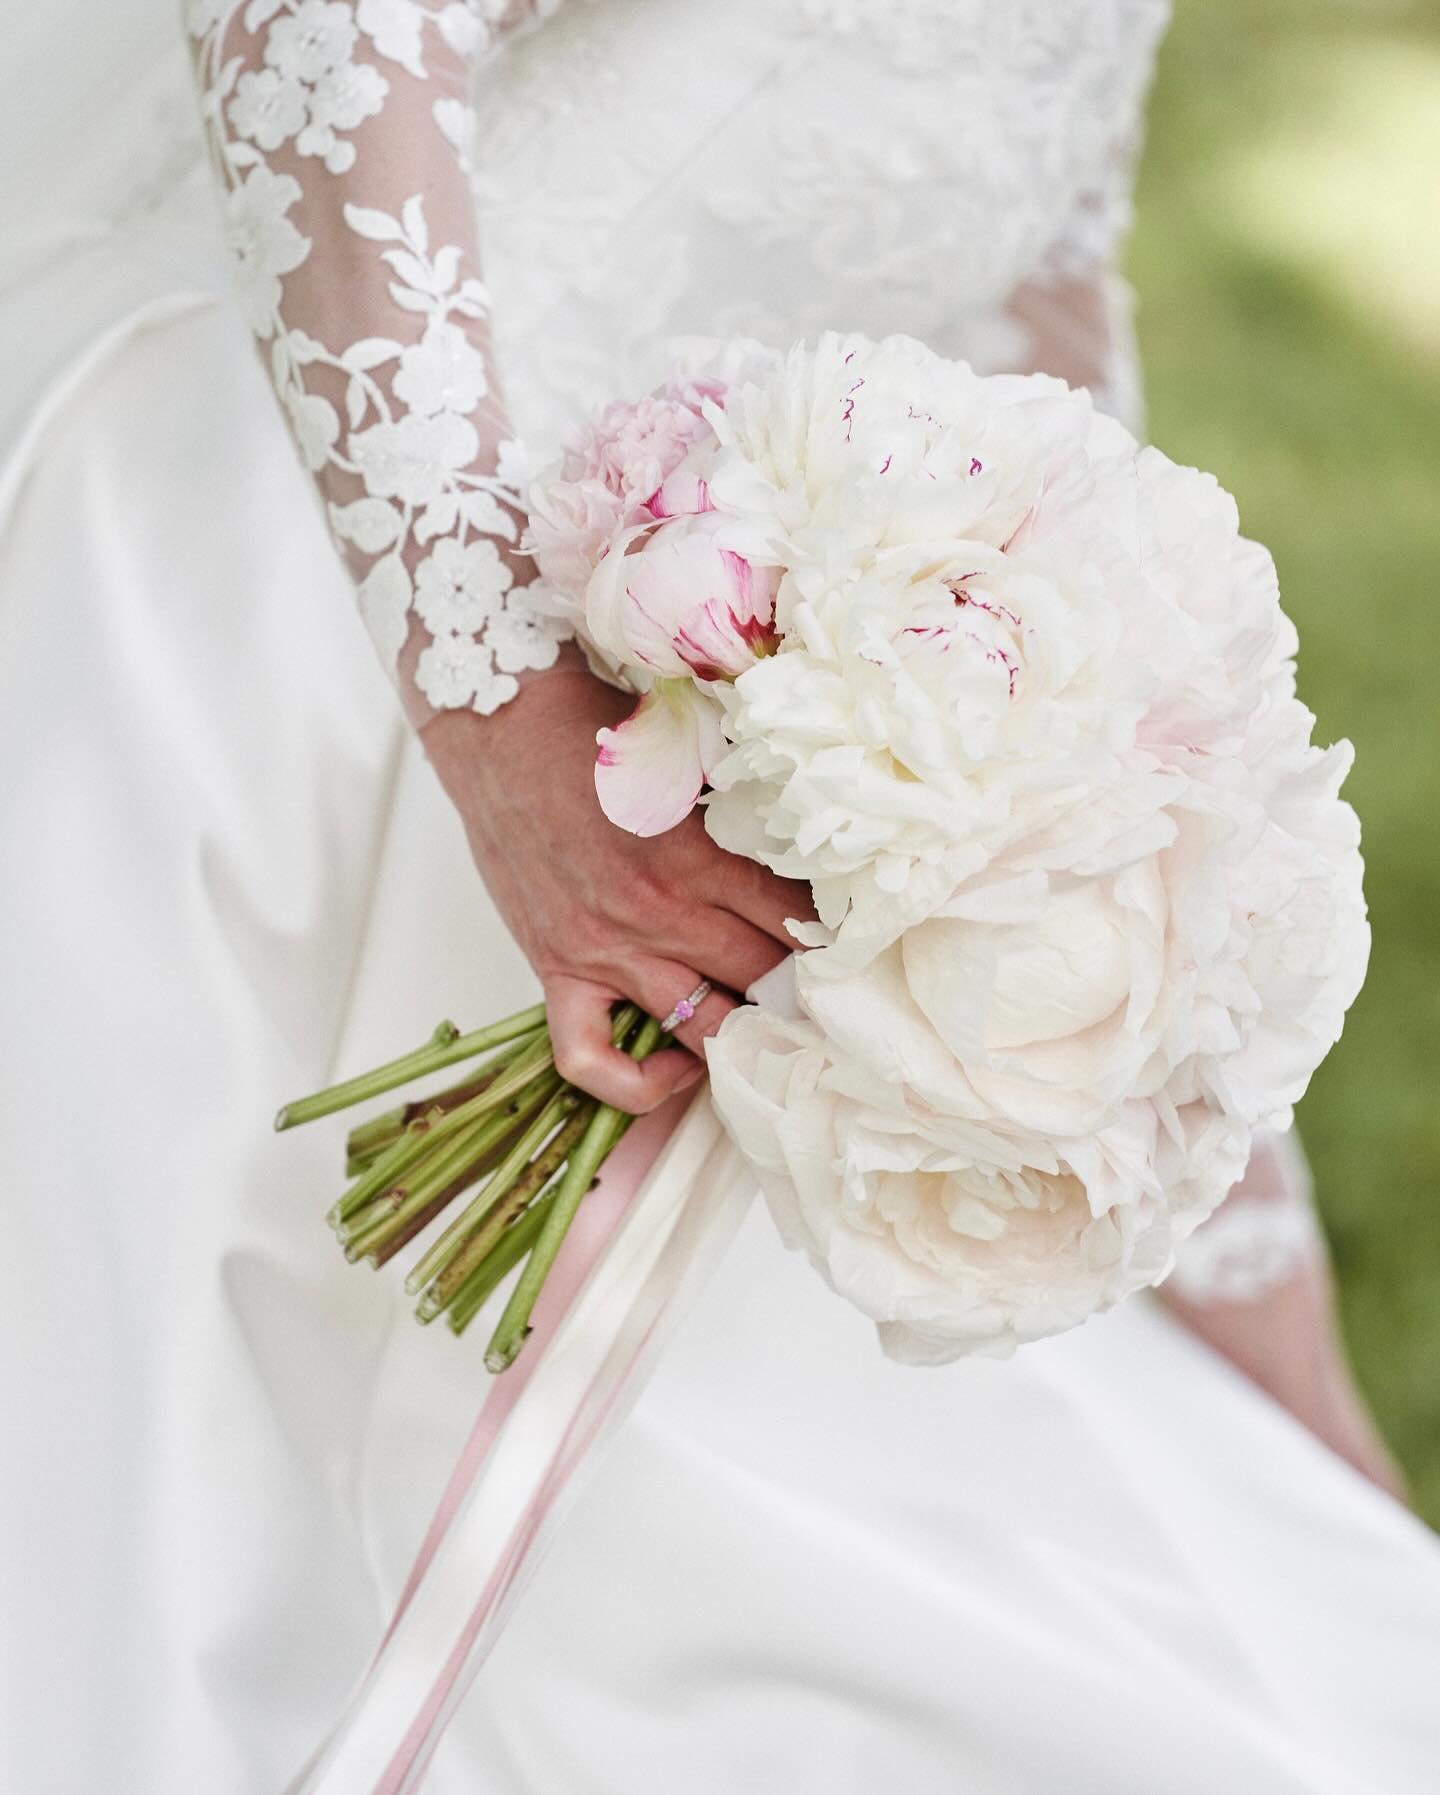 Celebrating peony season with a look back to @lottiealottie &lsquo;s stunning spring bouquet - swipe through for the perfect pale peony pink set against a sunny May day 🌸
Photography by @david_wheeler_photography
.
.
#peonybridalbouquet #peonies #pe